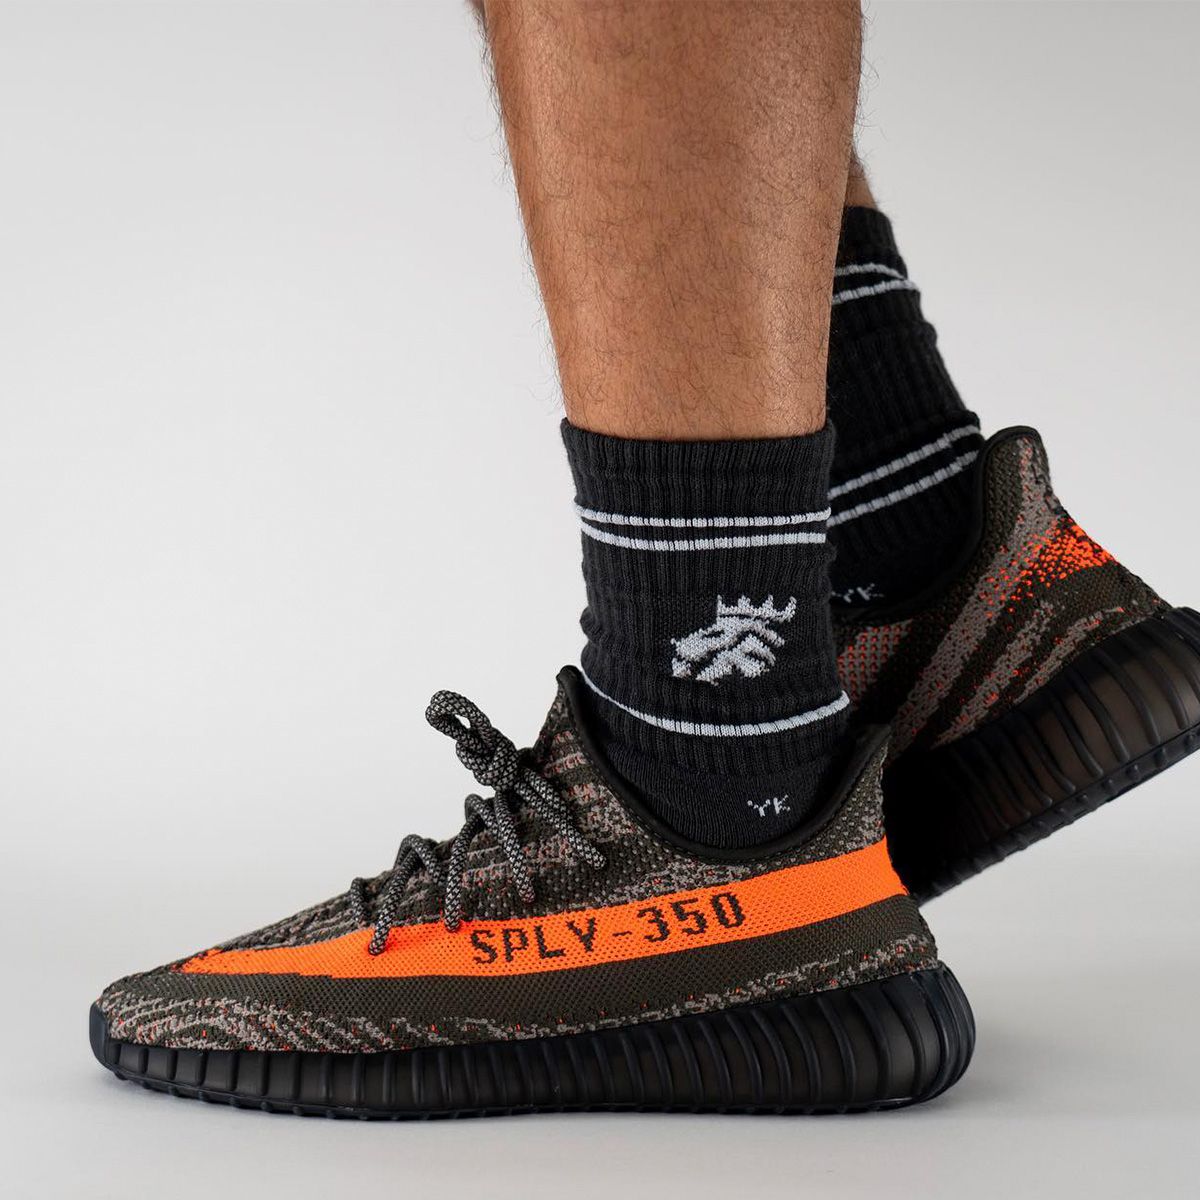 Where to Buy the YEEZY 350 V2 “Carbon Beluga” | House of Heat°